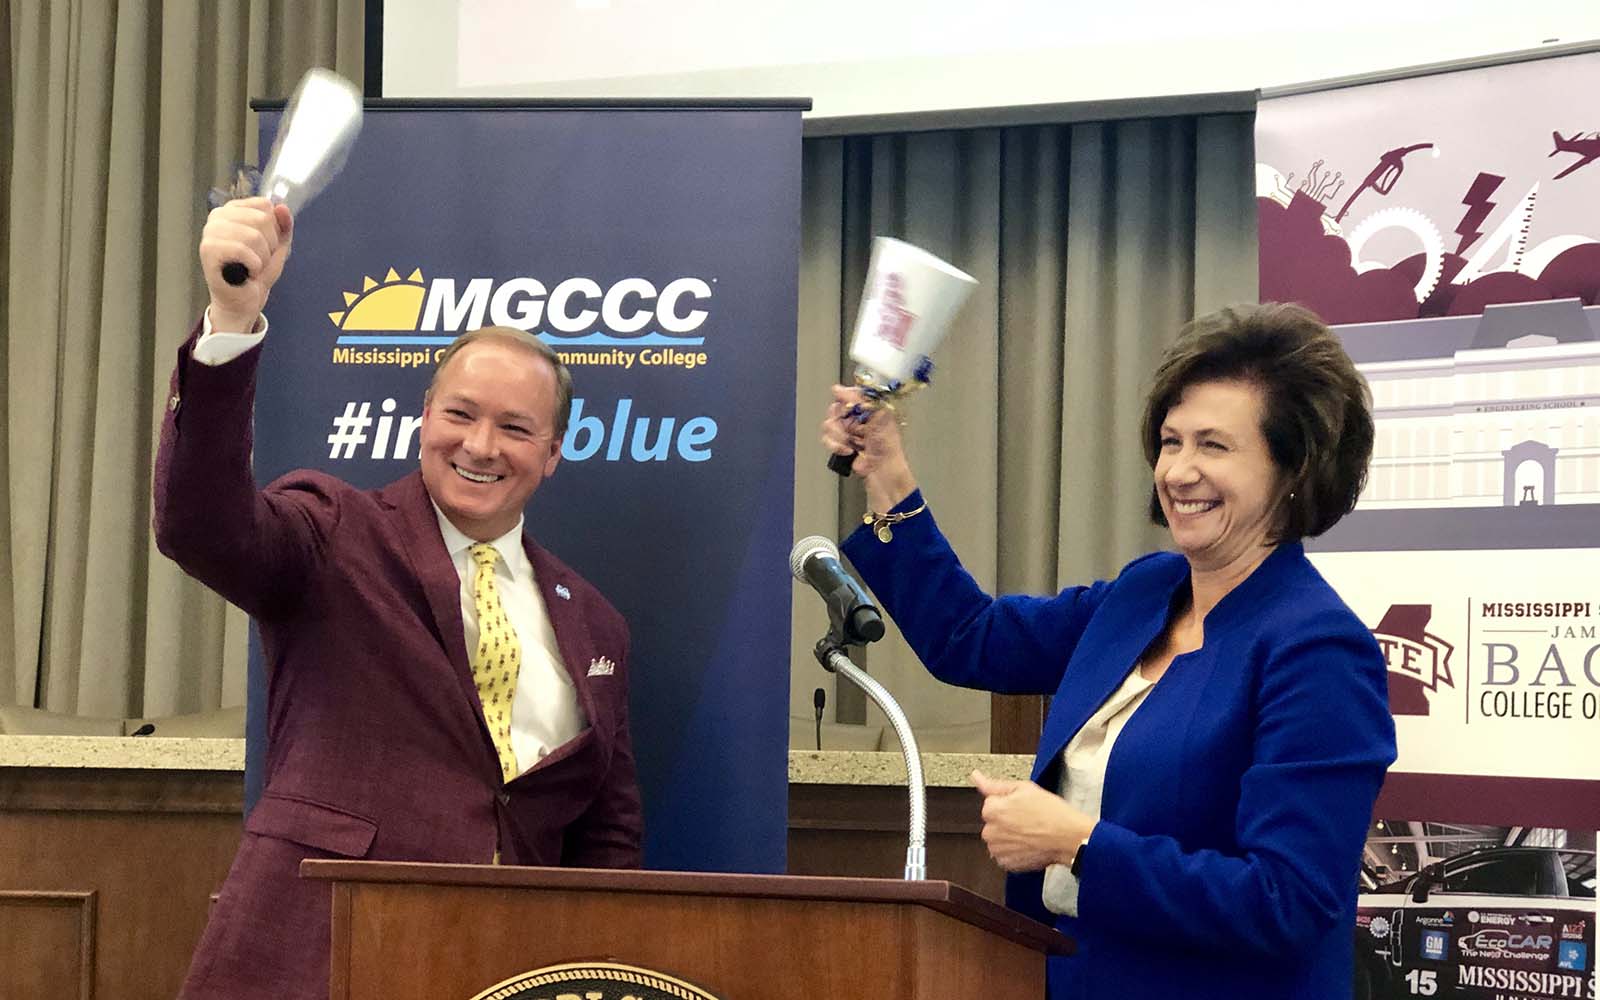 Msu Mgccc Expand Offerings Through Engineering On The Coast